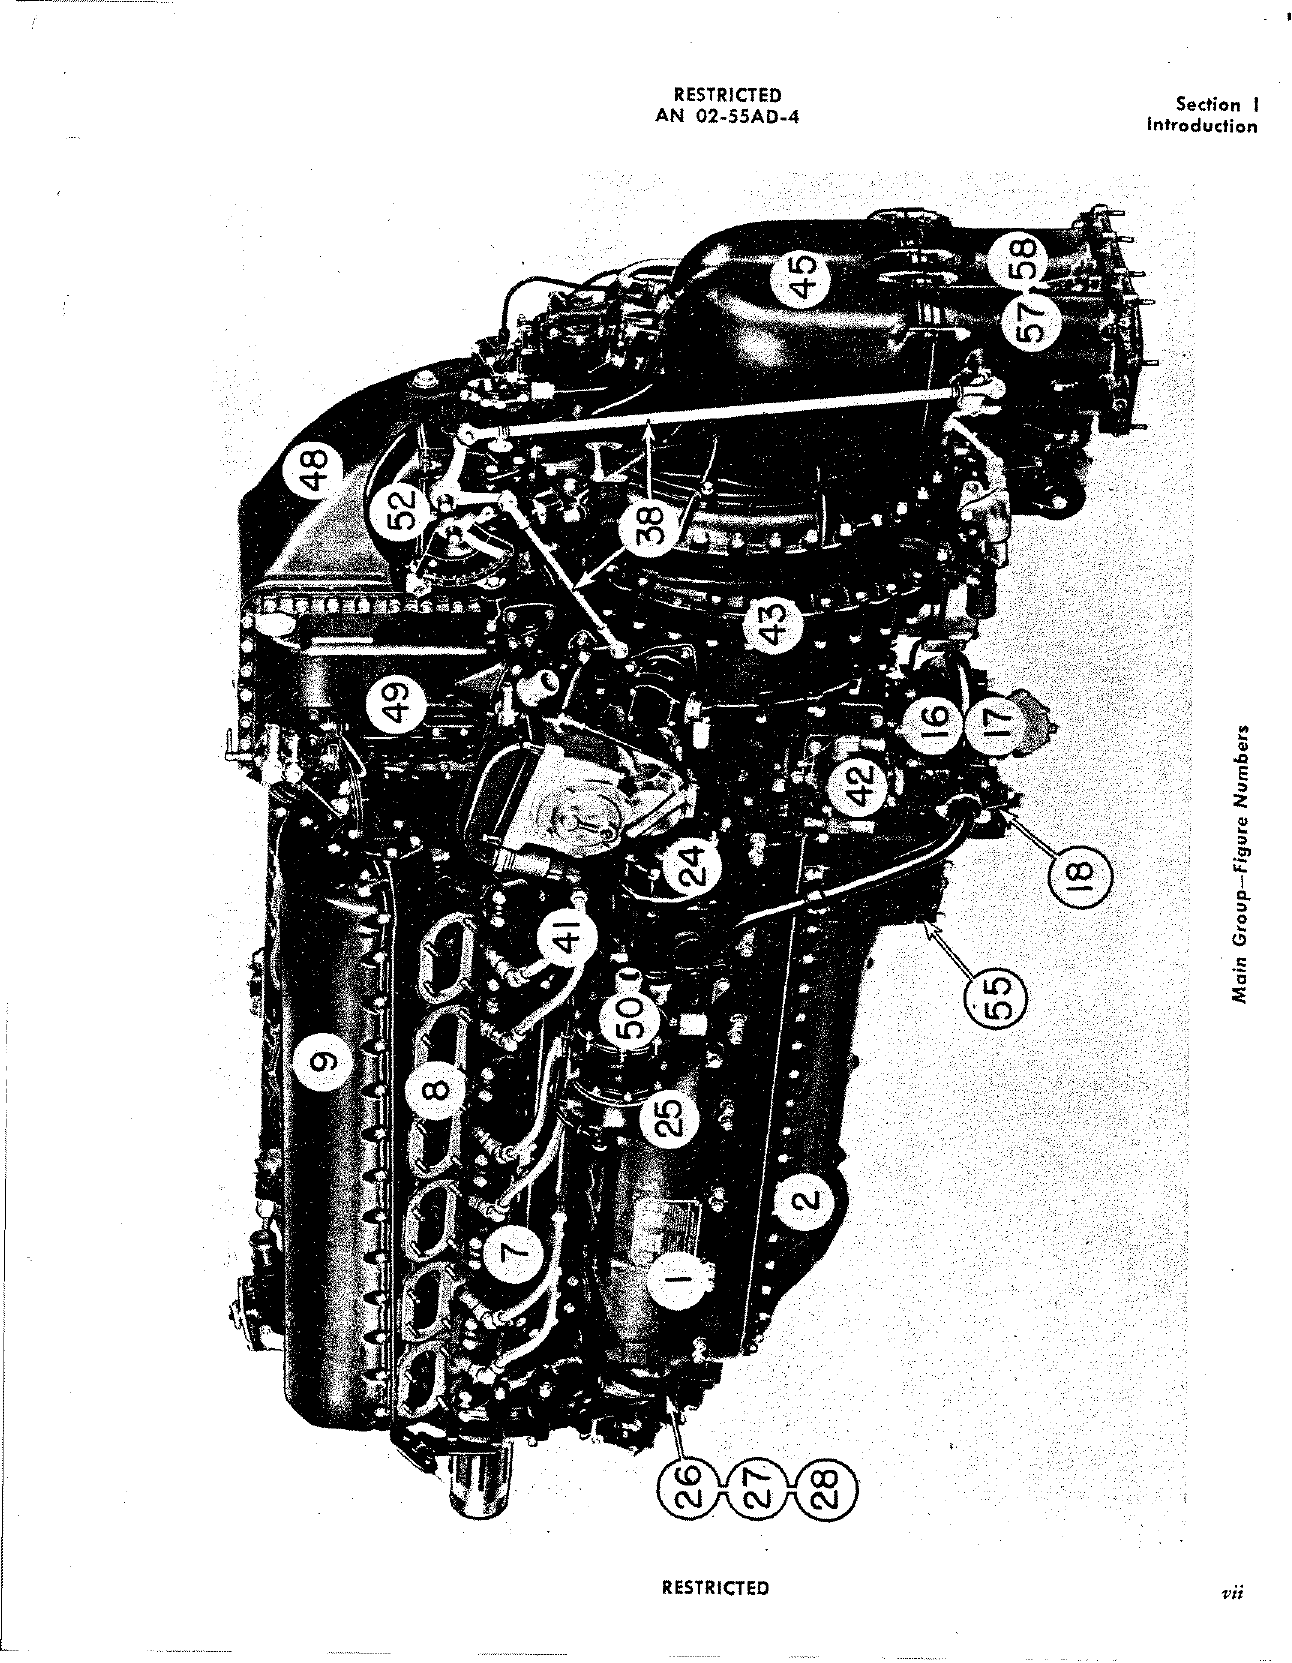 Sample page 9 from AirCorps Library document: Parts Catalog for Engine Models V-1650-9, V-1650-9A, V-1650-11, and V-1650-21 - Merlin 300 and 301